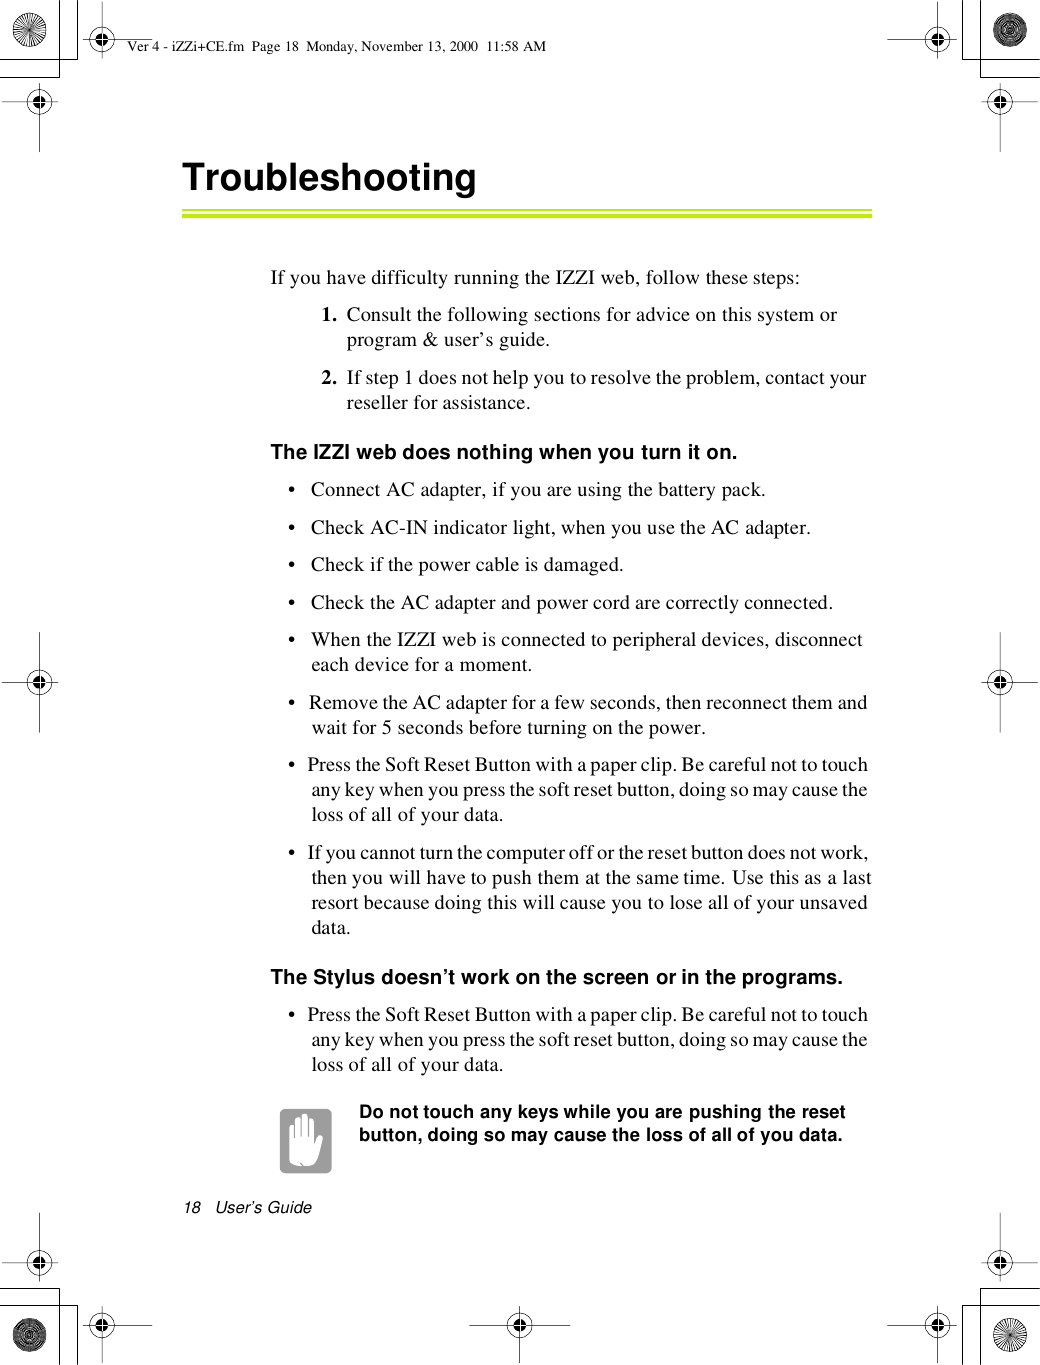 18User’s GuideTroubleshootingIf you have difficulty running the IZZI web, follow these steps:1. Consult the following sections for advice on this system orprogram &amp; user’s guide.2. If step 1 does not help you to resolve the problem, contact yourreseller for assistance.The IZZI web does nothing when you turn it on.• Connect AC adapter, if you are using the battery pack.• Check AC-IN indicator light, when you use the AC adapter.• Check if the power cable is damaged.• Check the AC adapter and power cord are correctly connected.• When the IZZI web is connected to peripheral devices, disconnecteach device for a moment.• Remove the AC adapter for a few seconds, then reconnect them andwait for 5 seconds before turning on the power.• Press the Soft Reset Button with a paper clip.Be careful not to touchany key when you press the soft reset button, doing so may cause theloss of all of your data.• If you cannot turn the computer off or the reset button does not work,then you will have to push them at the same time. Use this as a lastresort because doing this will cause you to lose all of your unsaveddata.The Stylus doesn’t work on the screen or in the programs.• Press the Soft Reset Button with a paper clip.Be careful not to touchany key when you press the soft reset button, doing so may cause theloss of all of your data.Do not touch any keys while you are pushing the resetbutton, doing so may cause the loss of all of you data.Ver 4 - iZZi+CE.fm Page 18 Monday, November 13, 2000 11:58 AM